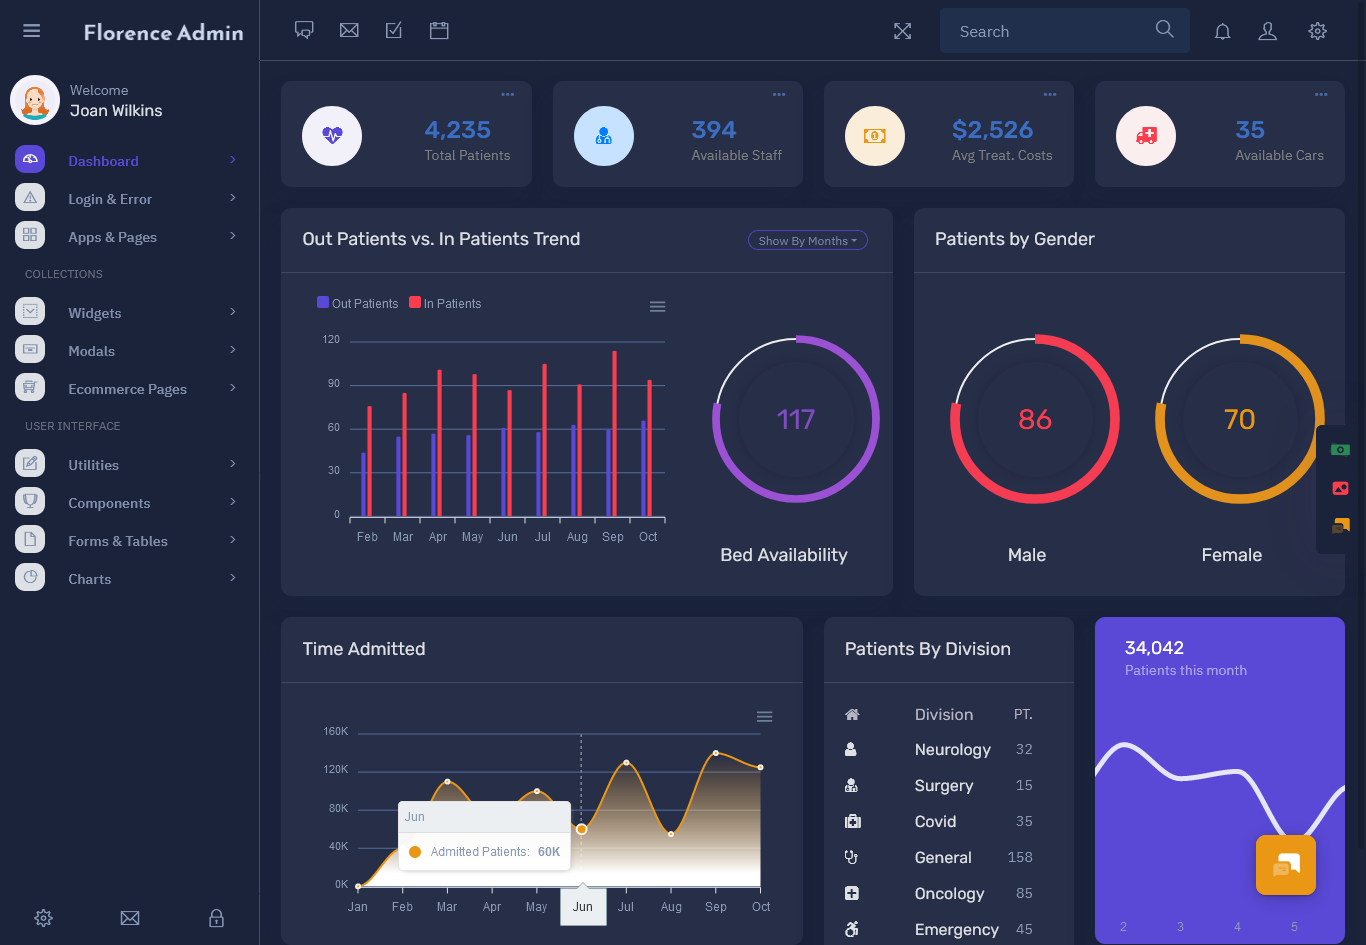 Bootstrap Admin Templates Dashboard with Admin Panel - Florence